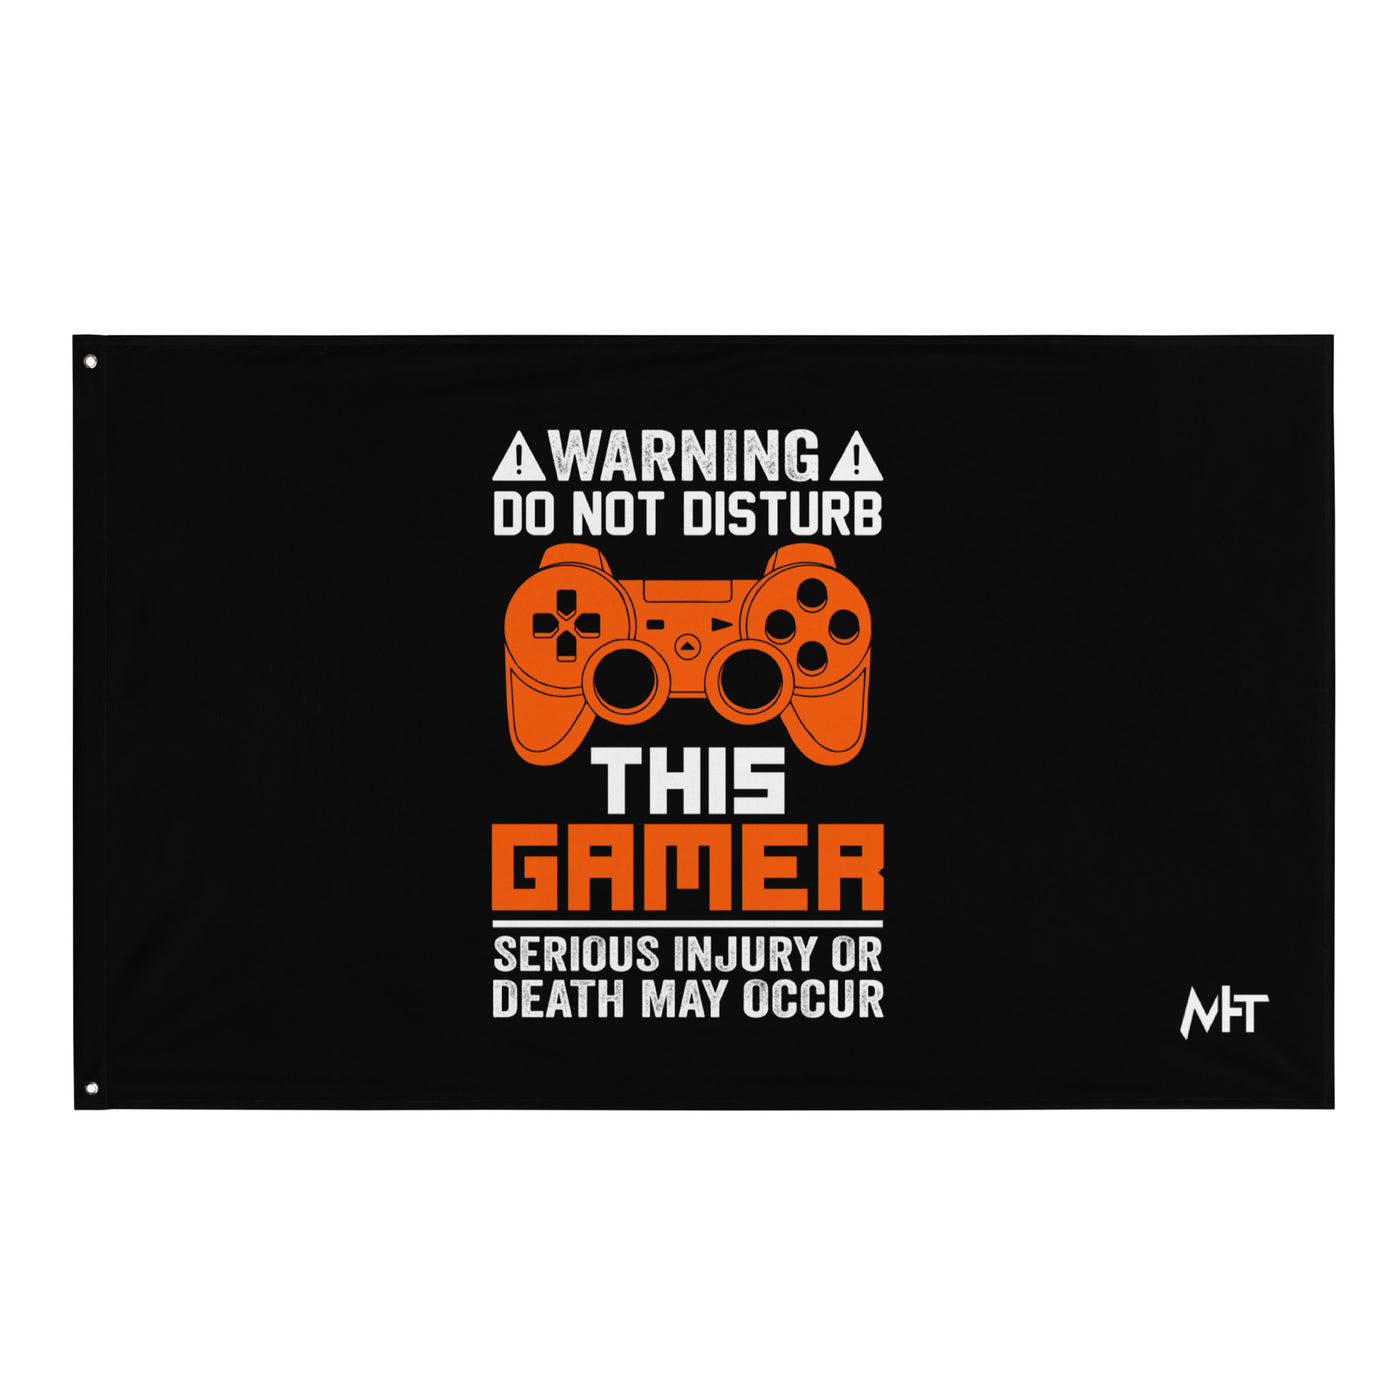 Warning: Do Not Disturb this Gamer! Serious Injury or Death may Occur - Flag